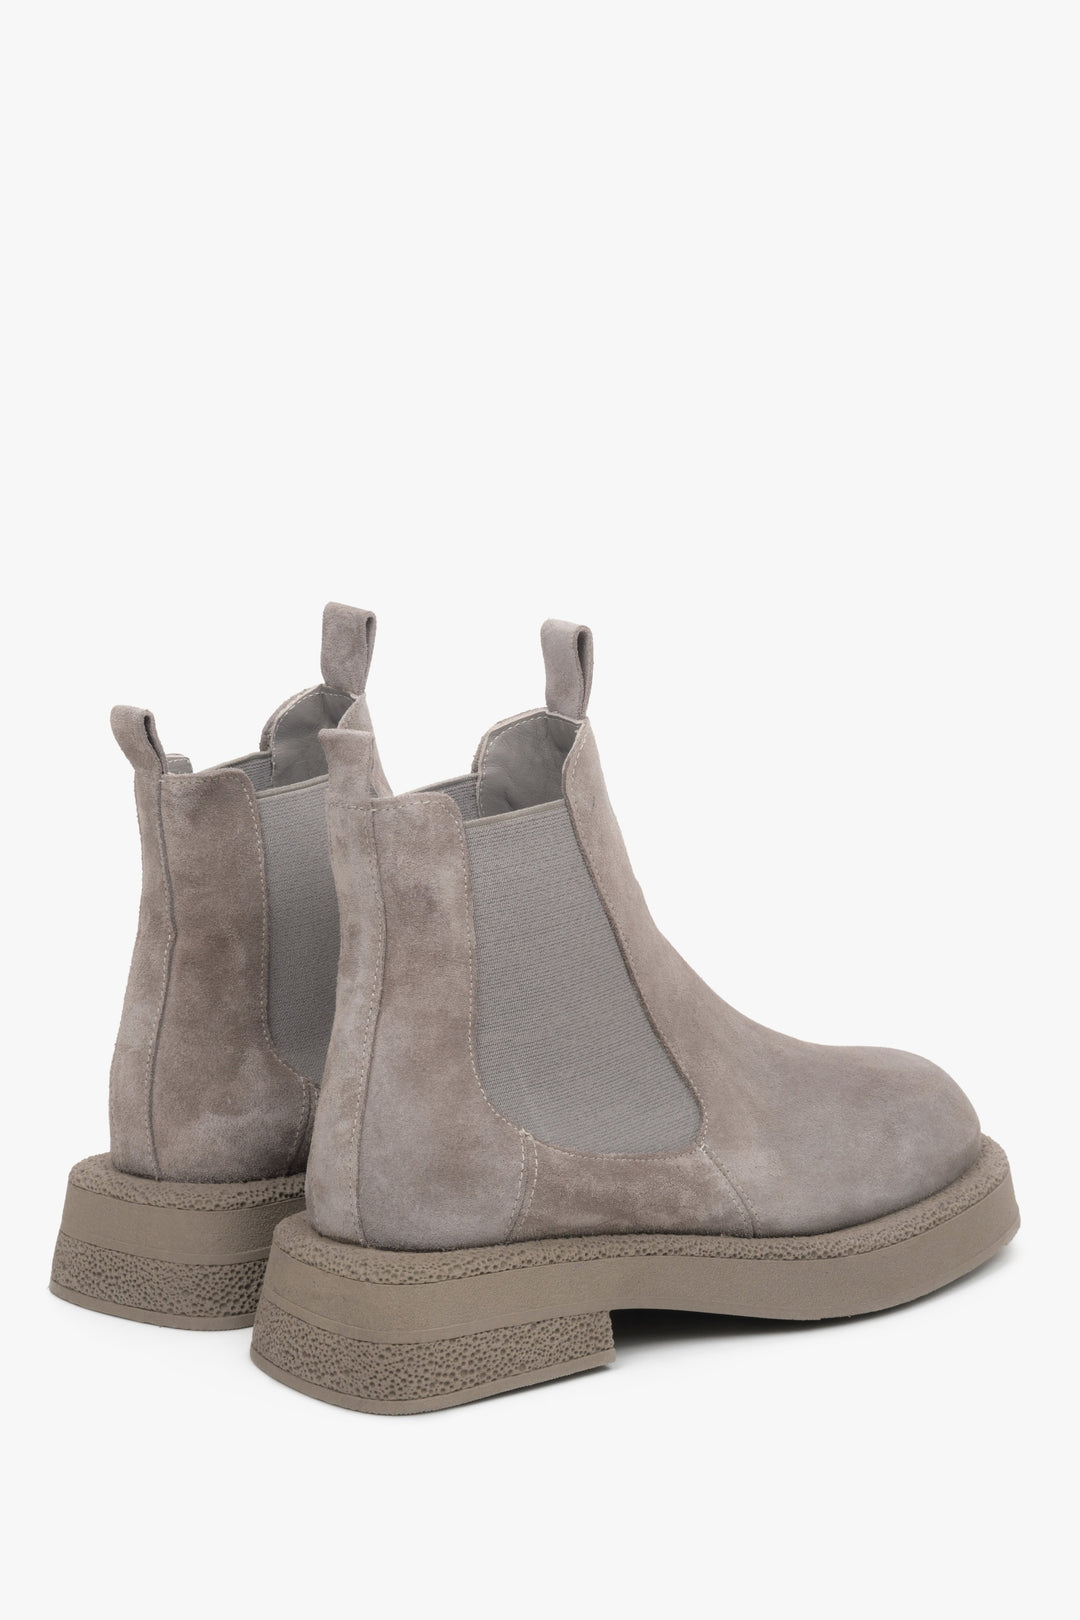 Women's genuine suede Chelsea boots in grey Estro - a close-up on heel counter.